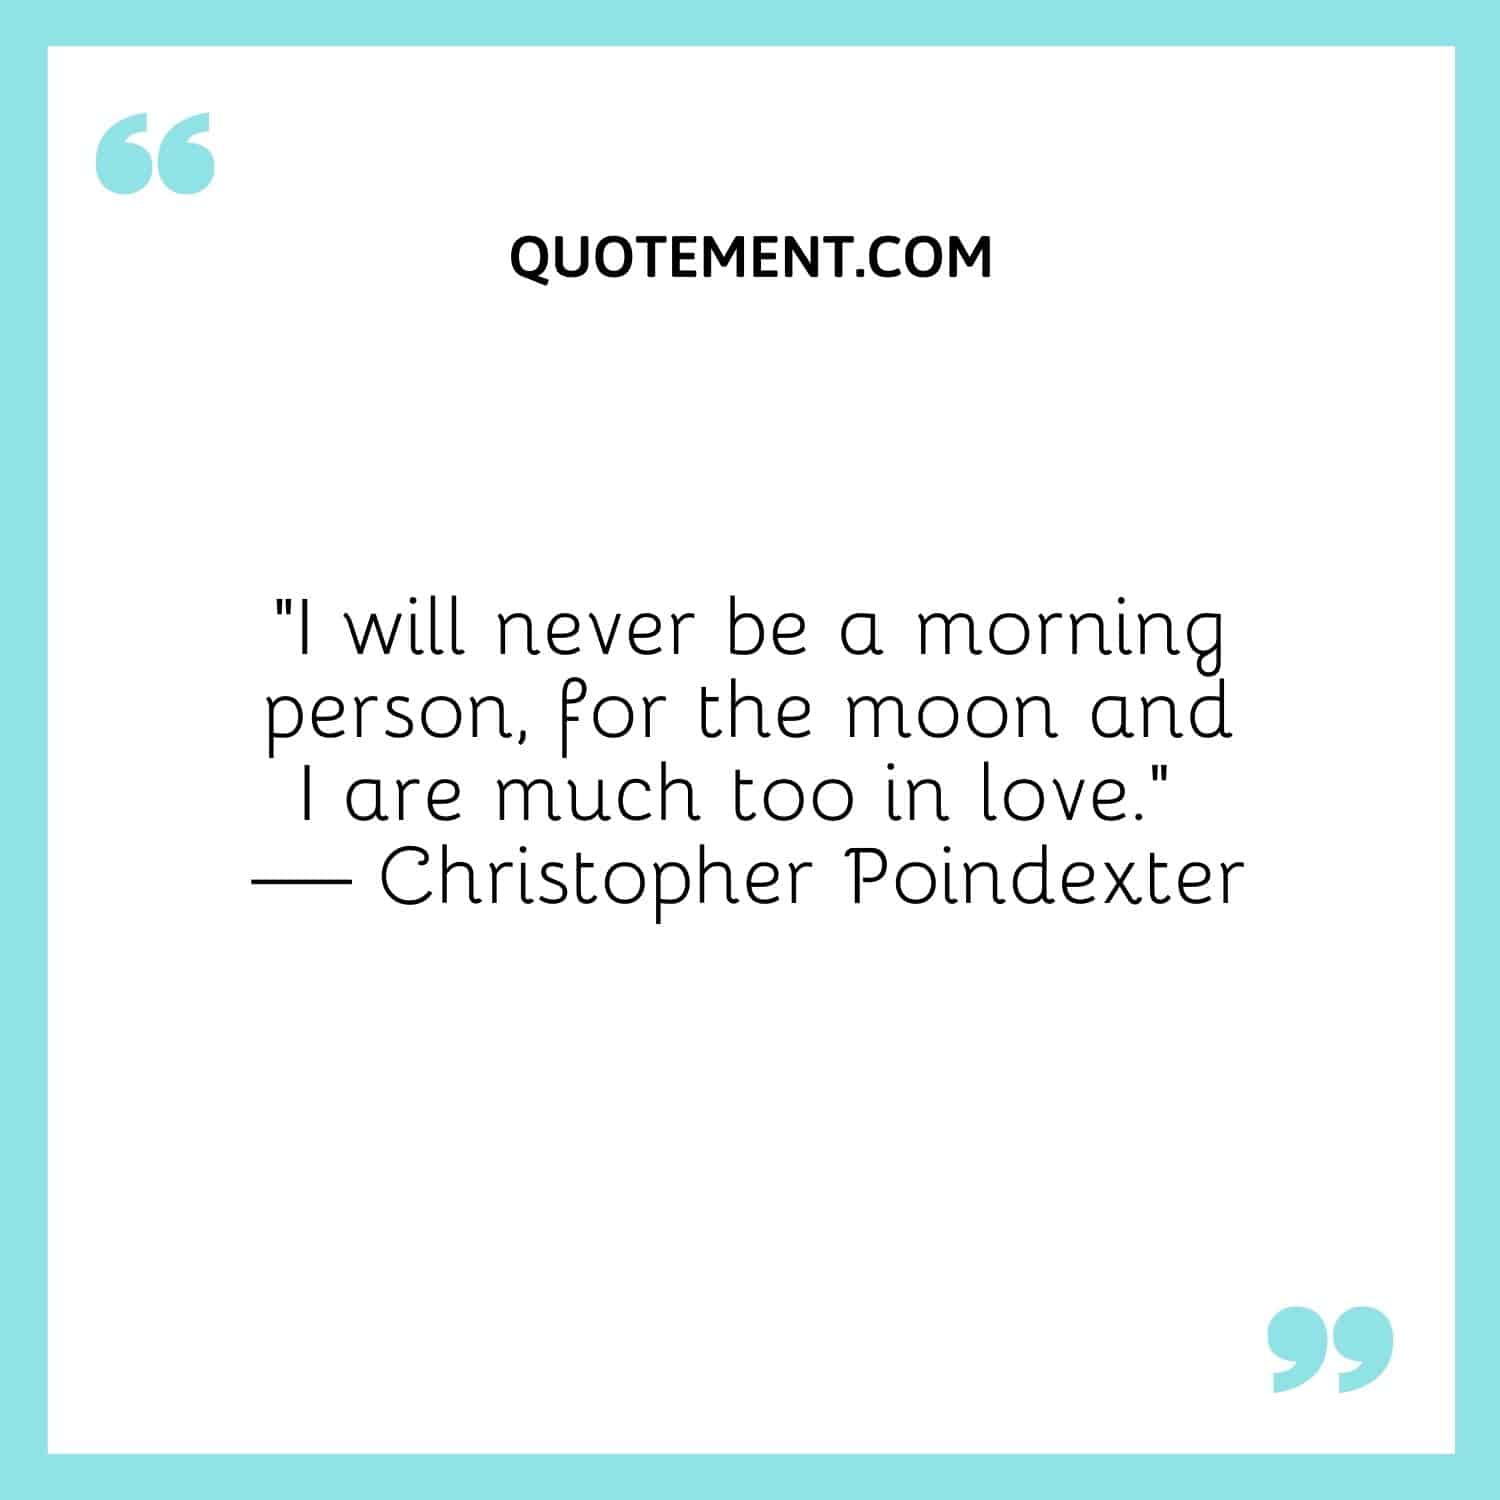 “I will never be a morning person, for the moon and I are much too in love.” — Christopher Poindexter